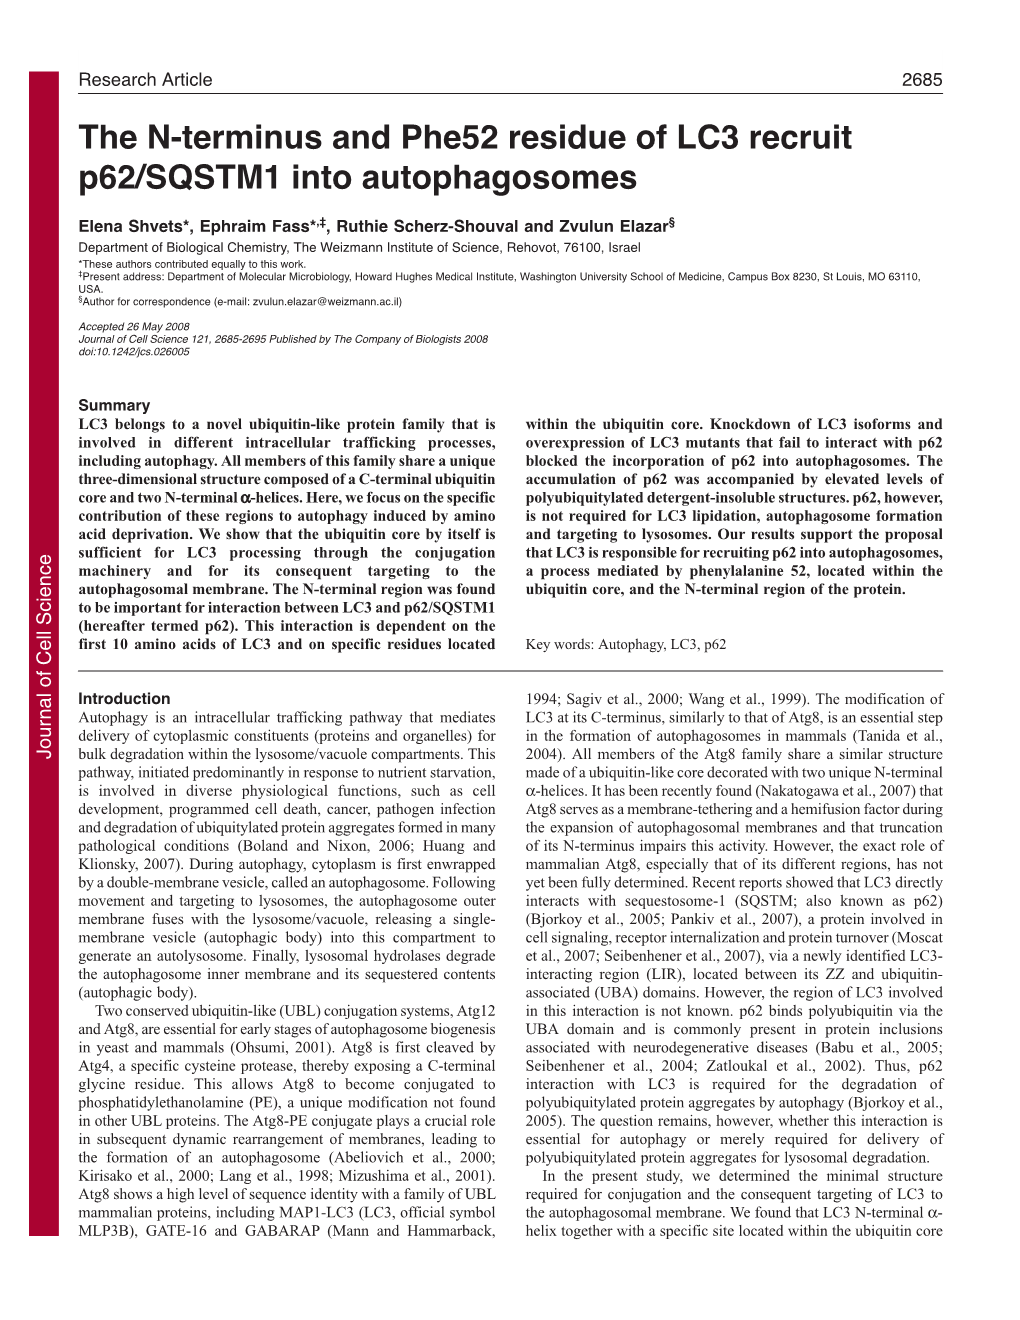 The N-Terminus and Phe52 Residue of LC3 Recruit P62/SQSTM1 Into Autophagosomes